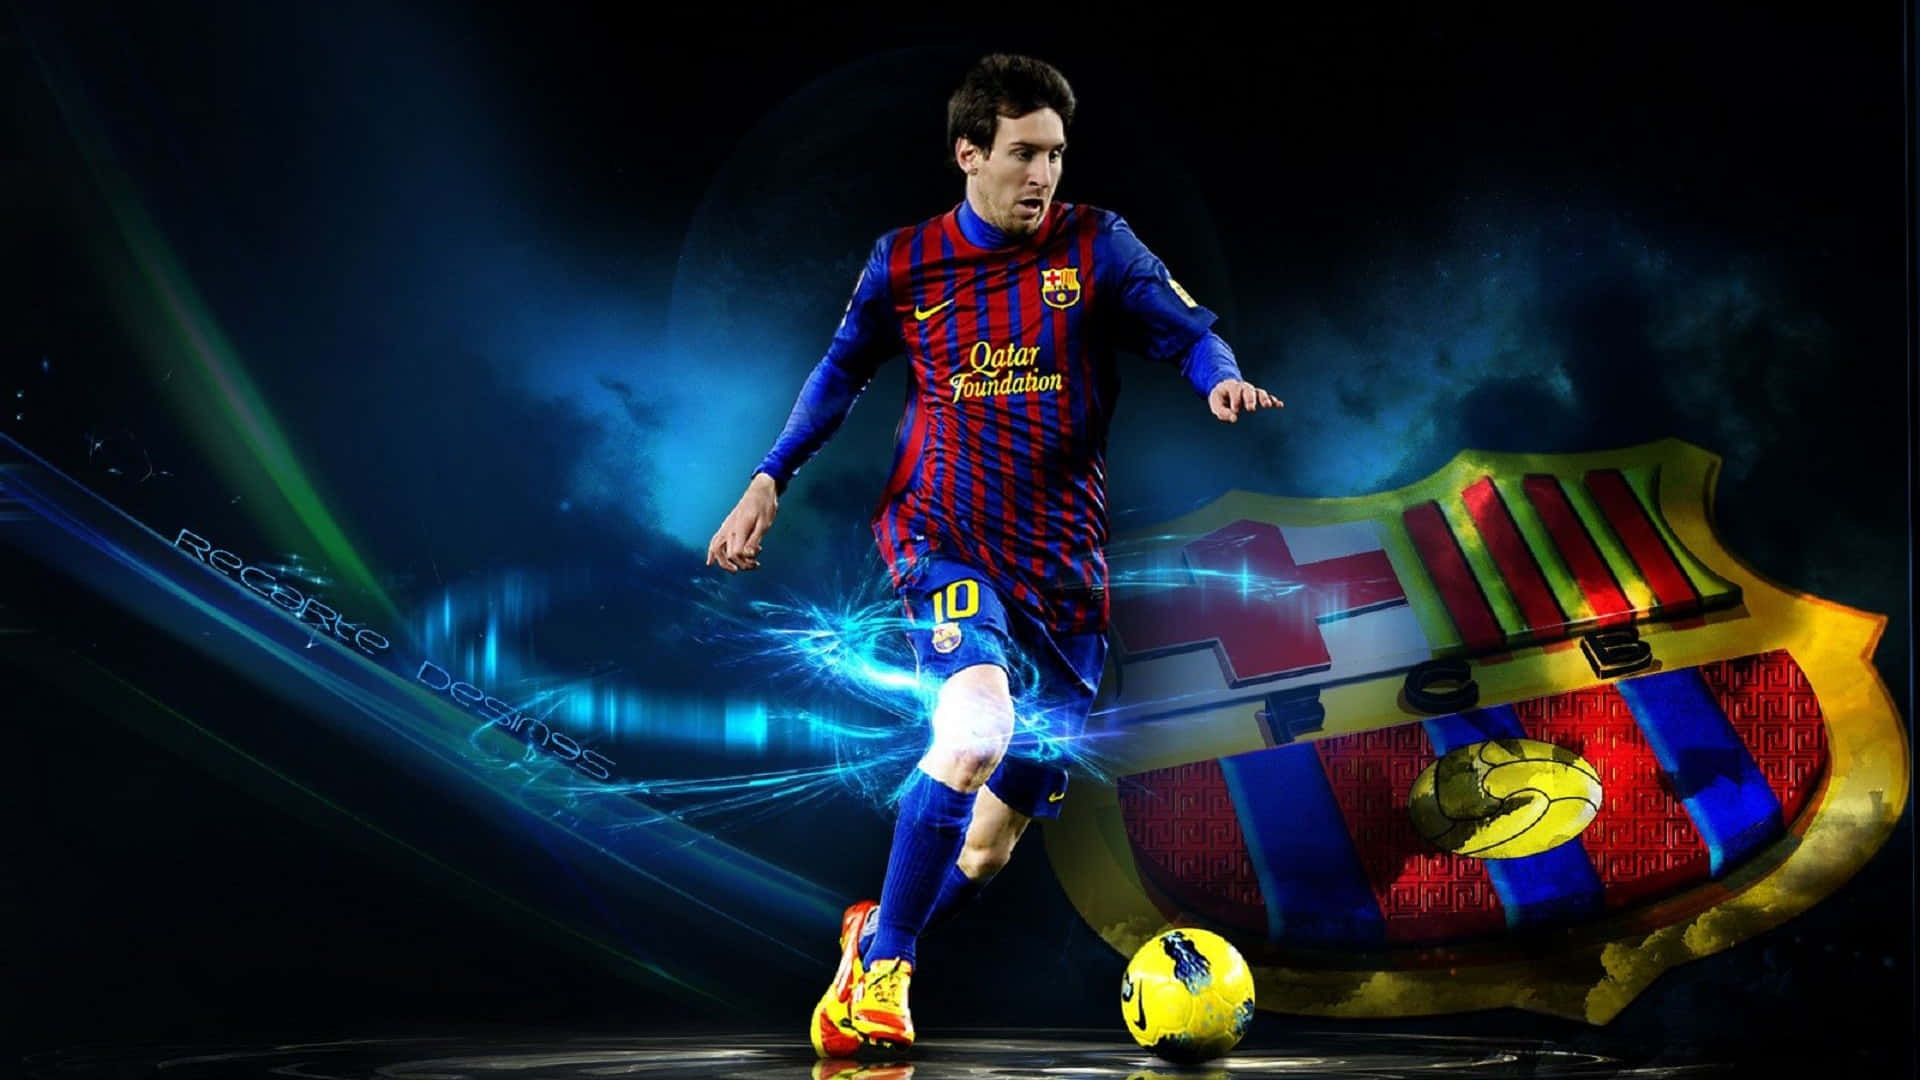 Revel in the passion of the beautiful game! Wallpaper